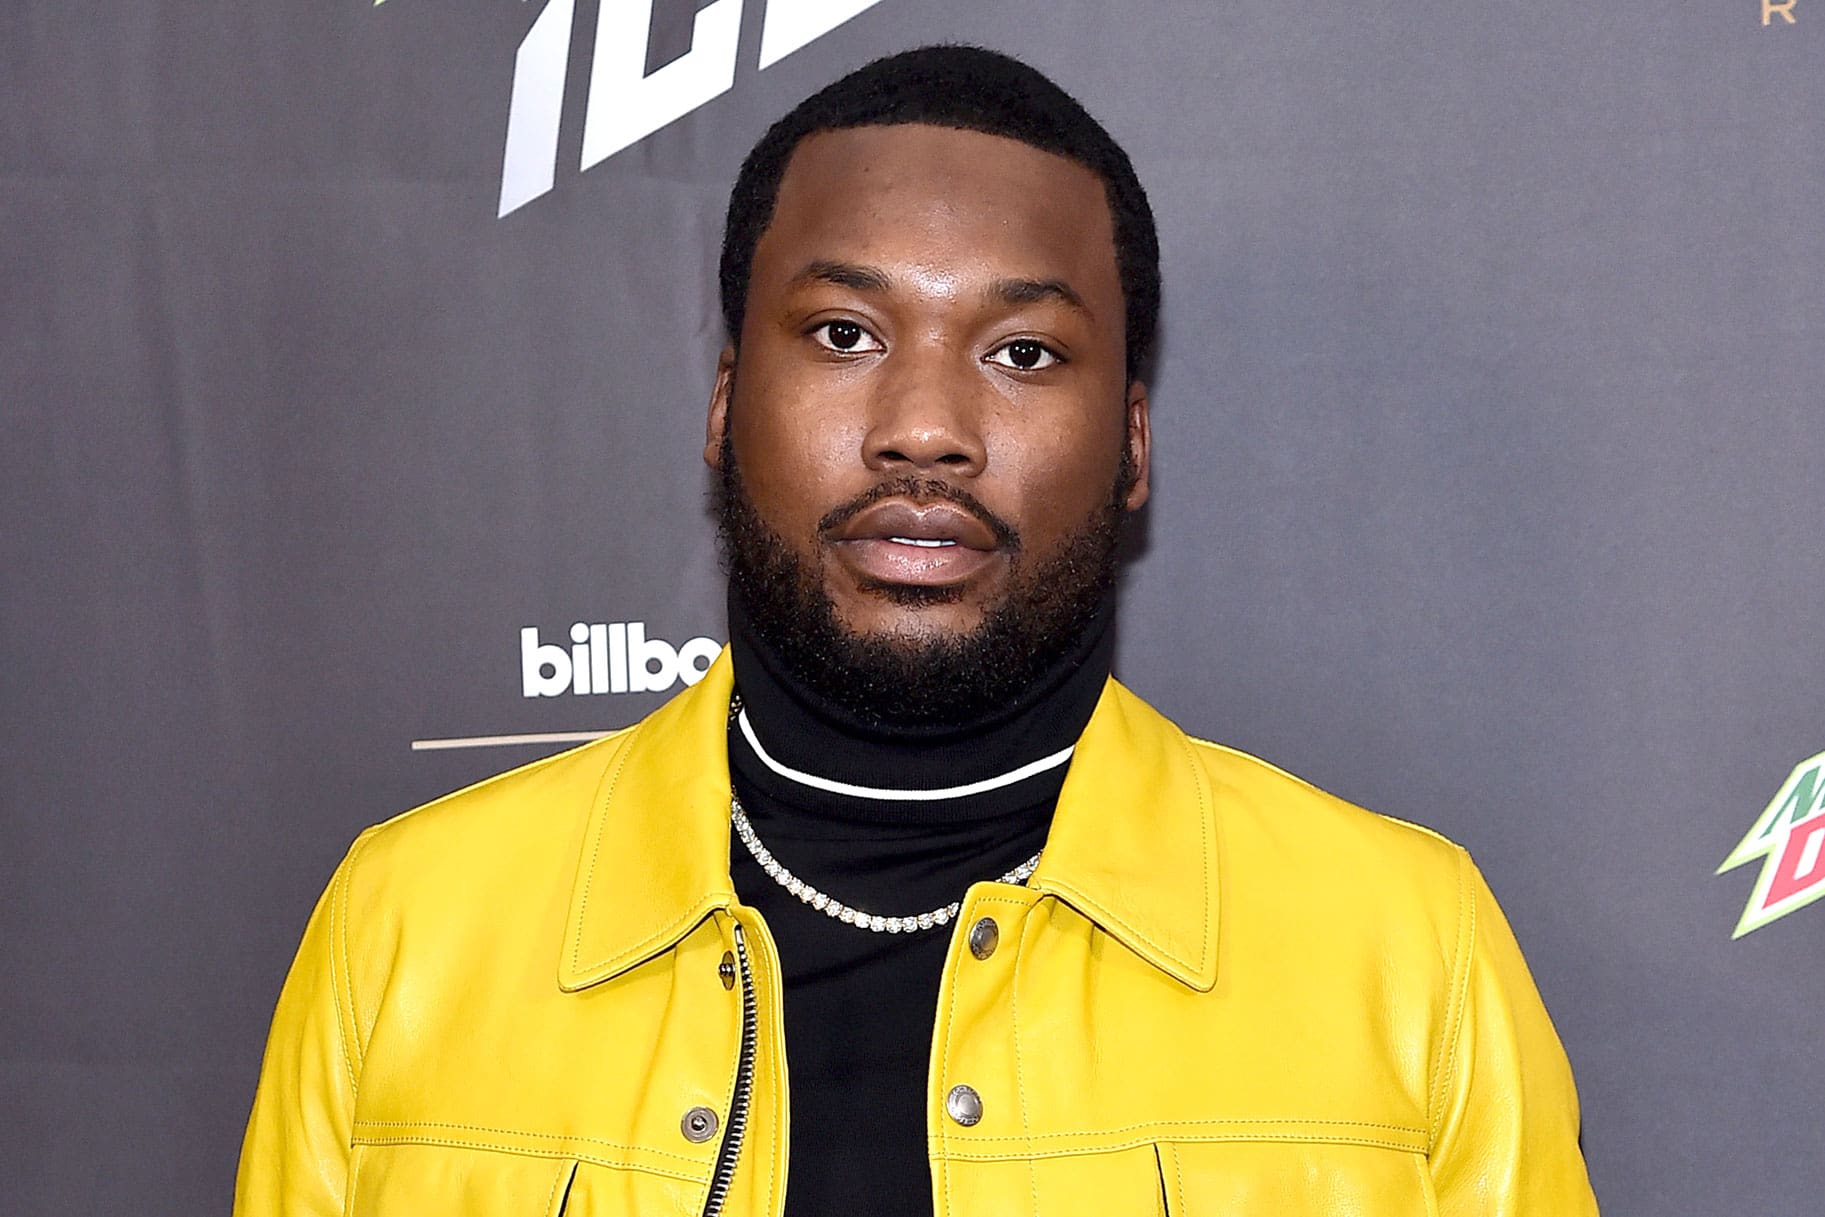 Meek Mill’s Breakup Announcement Has Fans Laughing Their Hearts Out